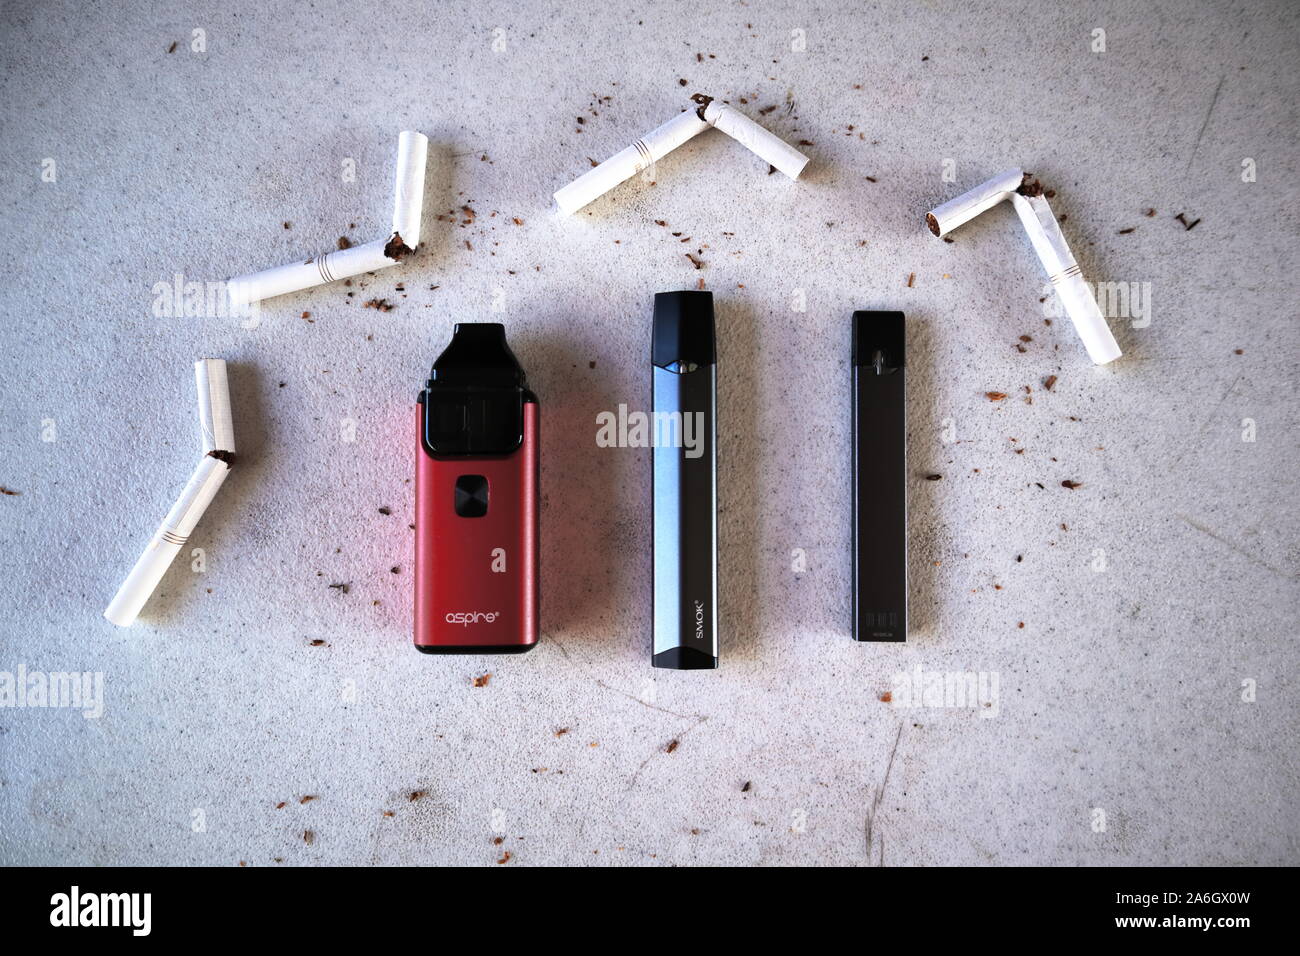 Different vape devices electronic cigarettes juul, aspire breeze, smok infinix, as smoking alternatives with broken marlboro gold cigarettes and scatt Stock Photo